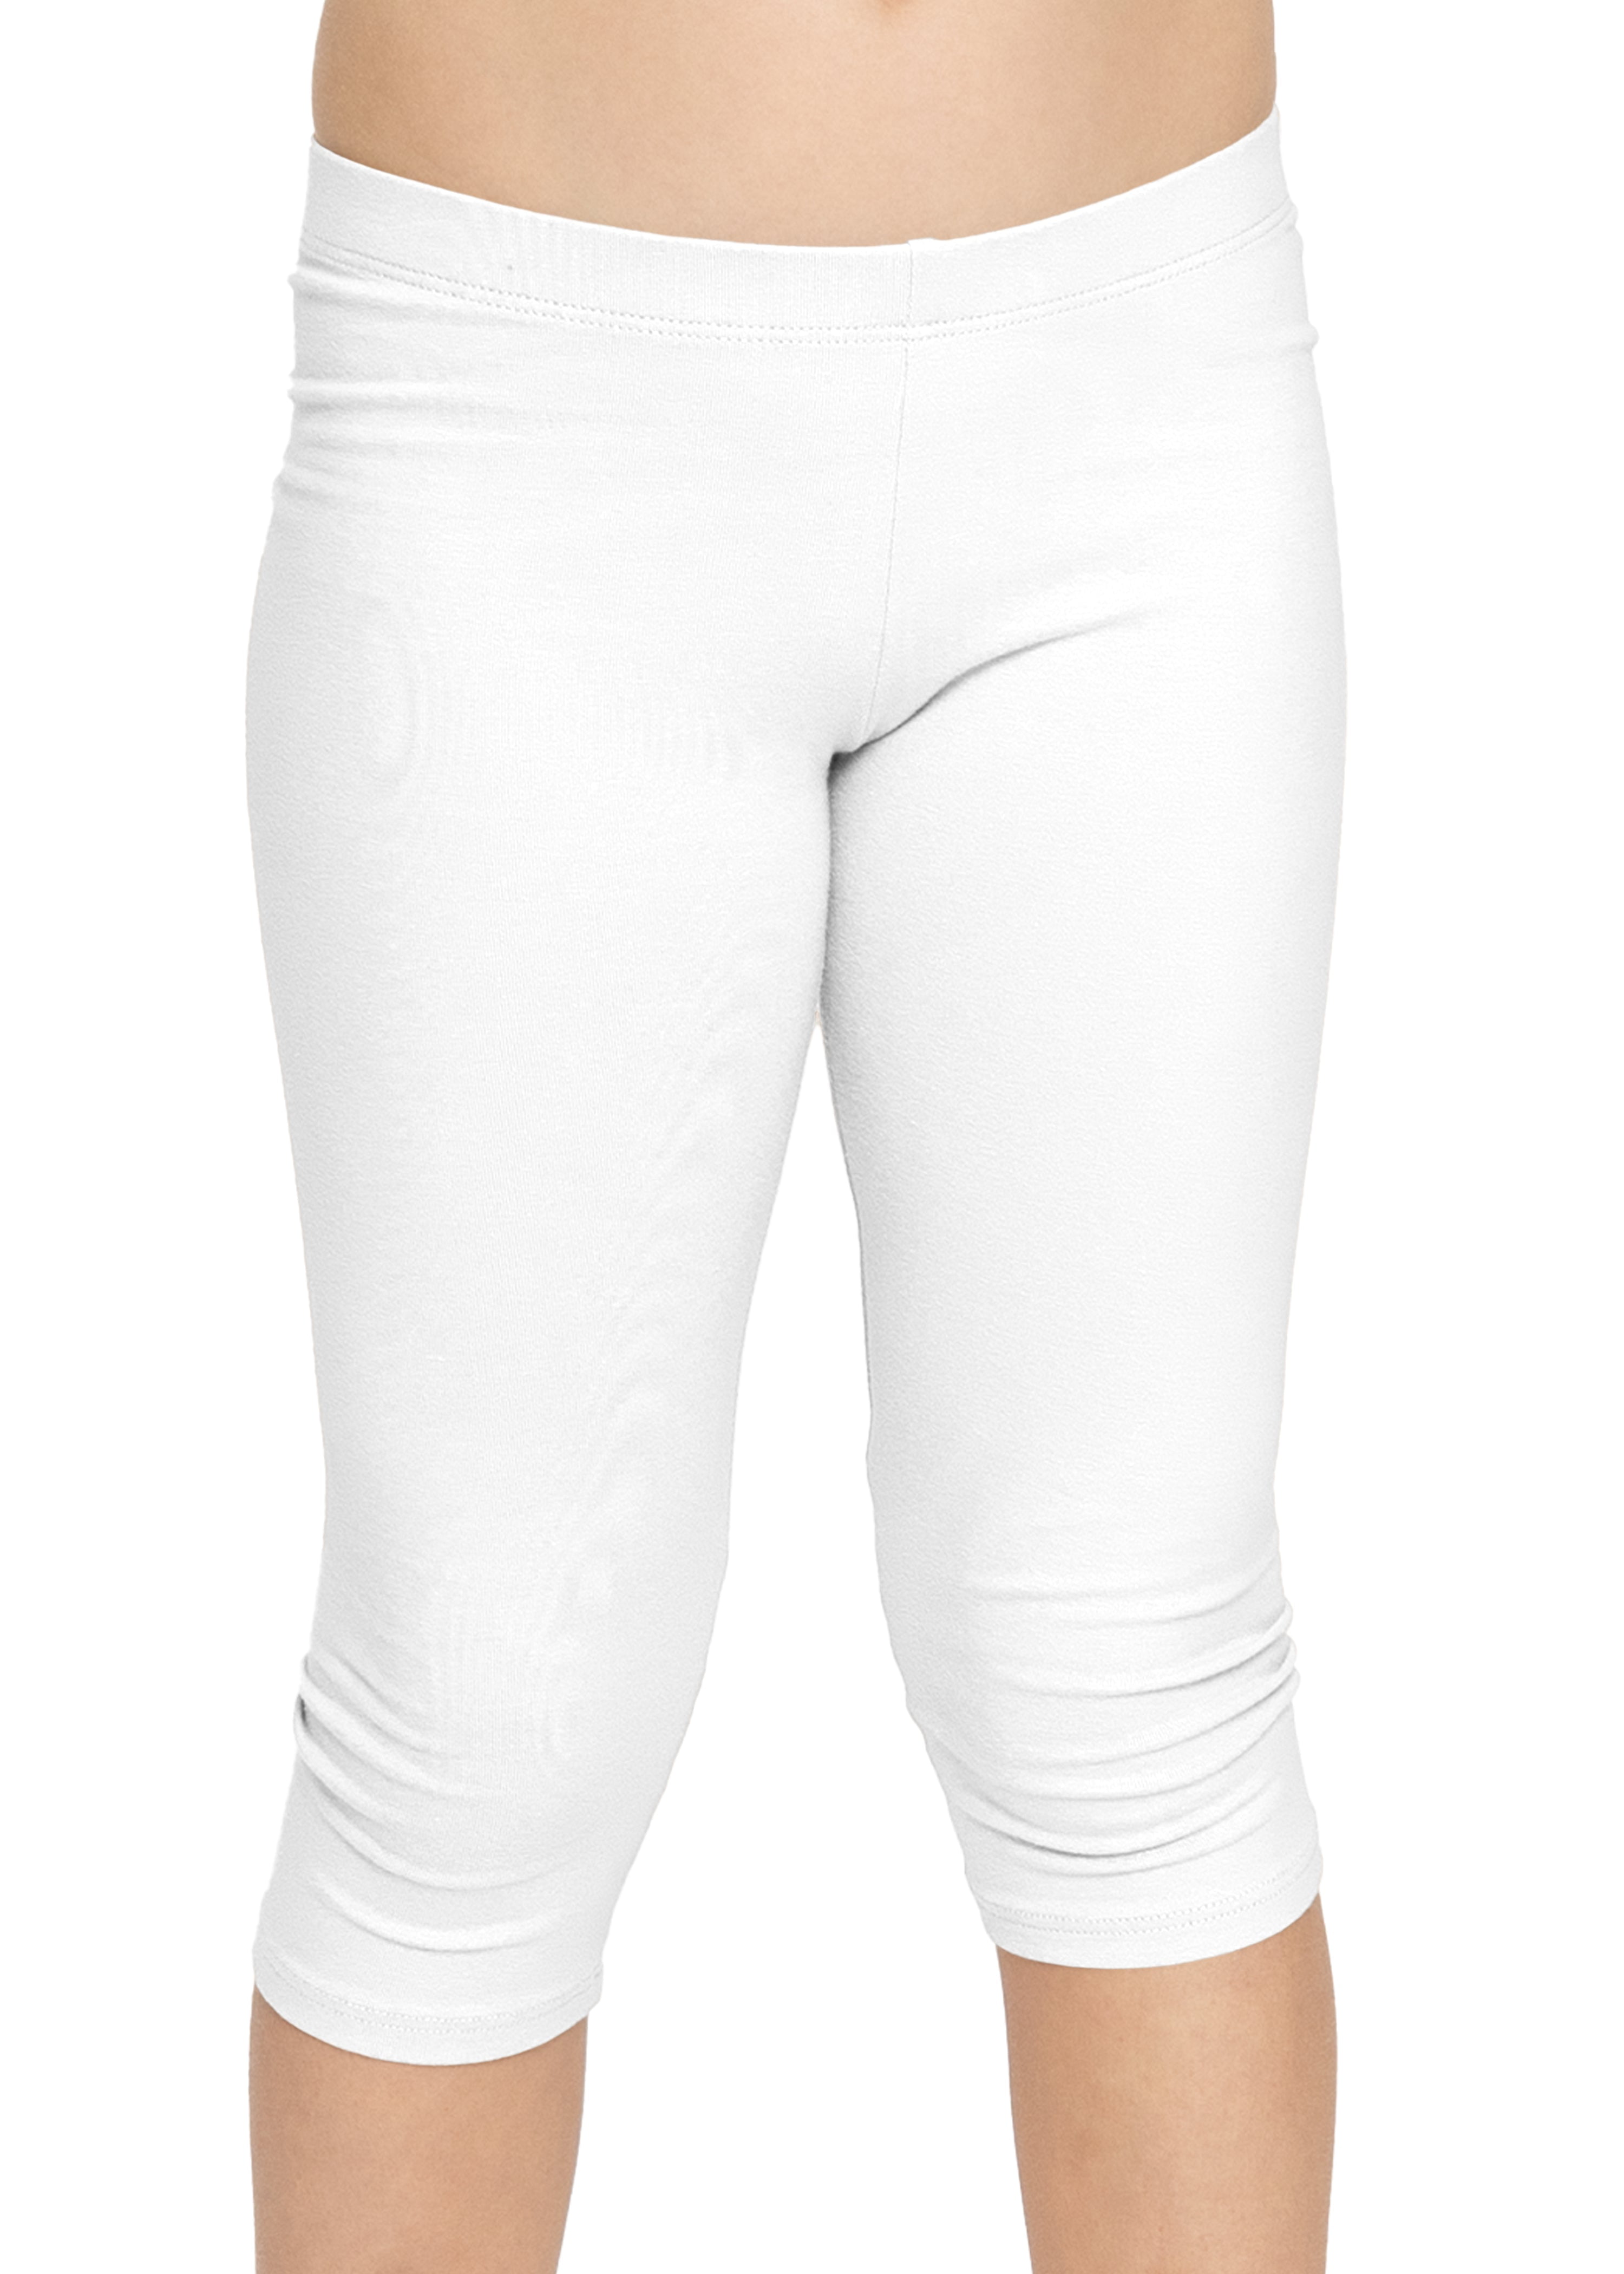 Stretch Is Comfort Girl's Knee-Length Leggings | Cotton Spandex | Child  Size 6 -12